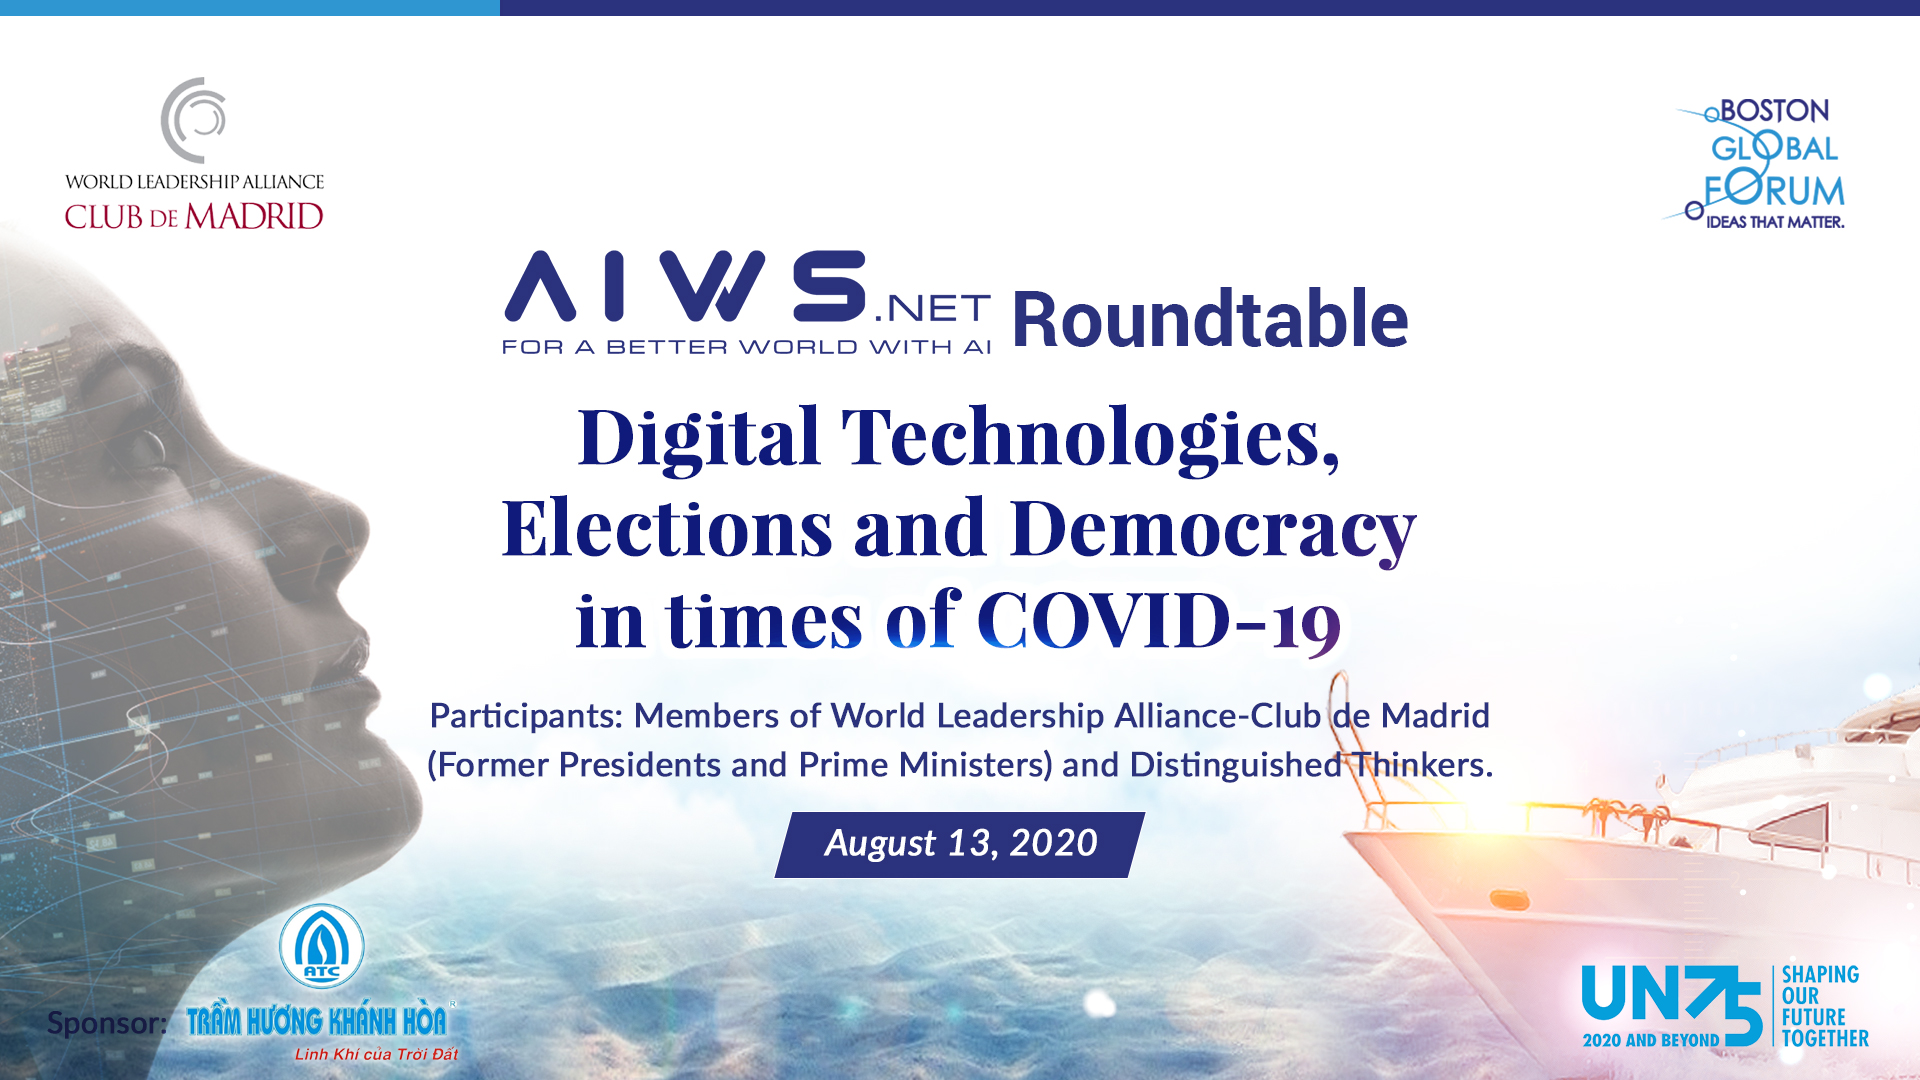 Live Session: Digital Technologies, Elections and Democracy in times of COVID-19